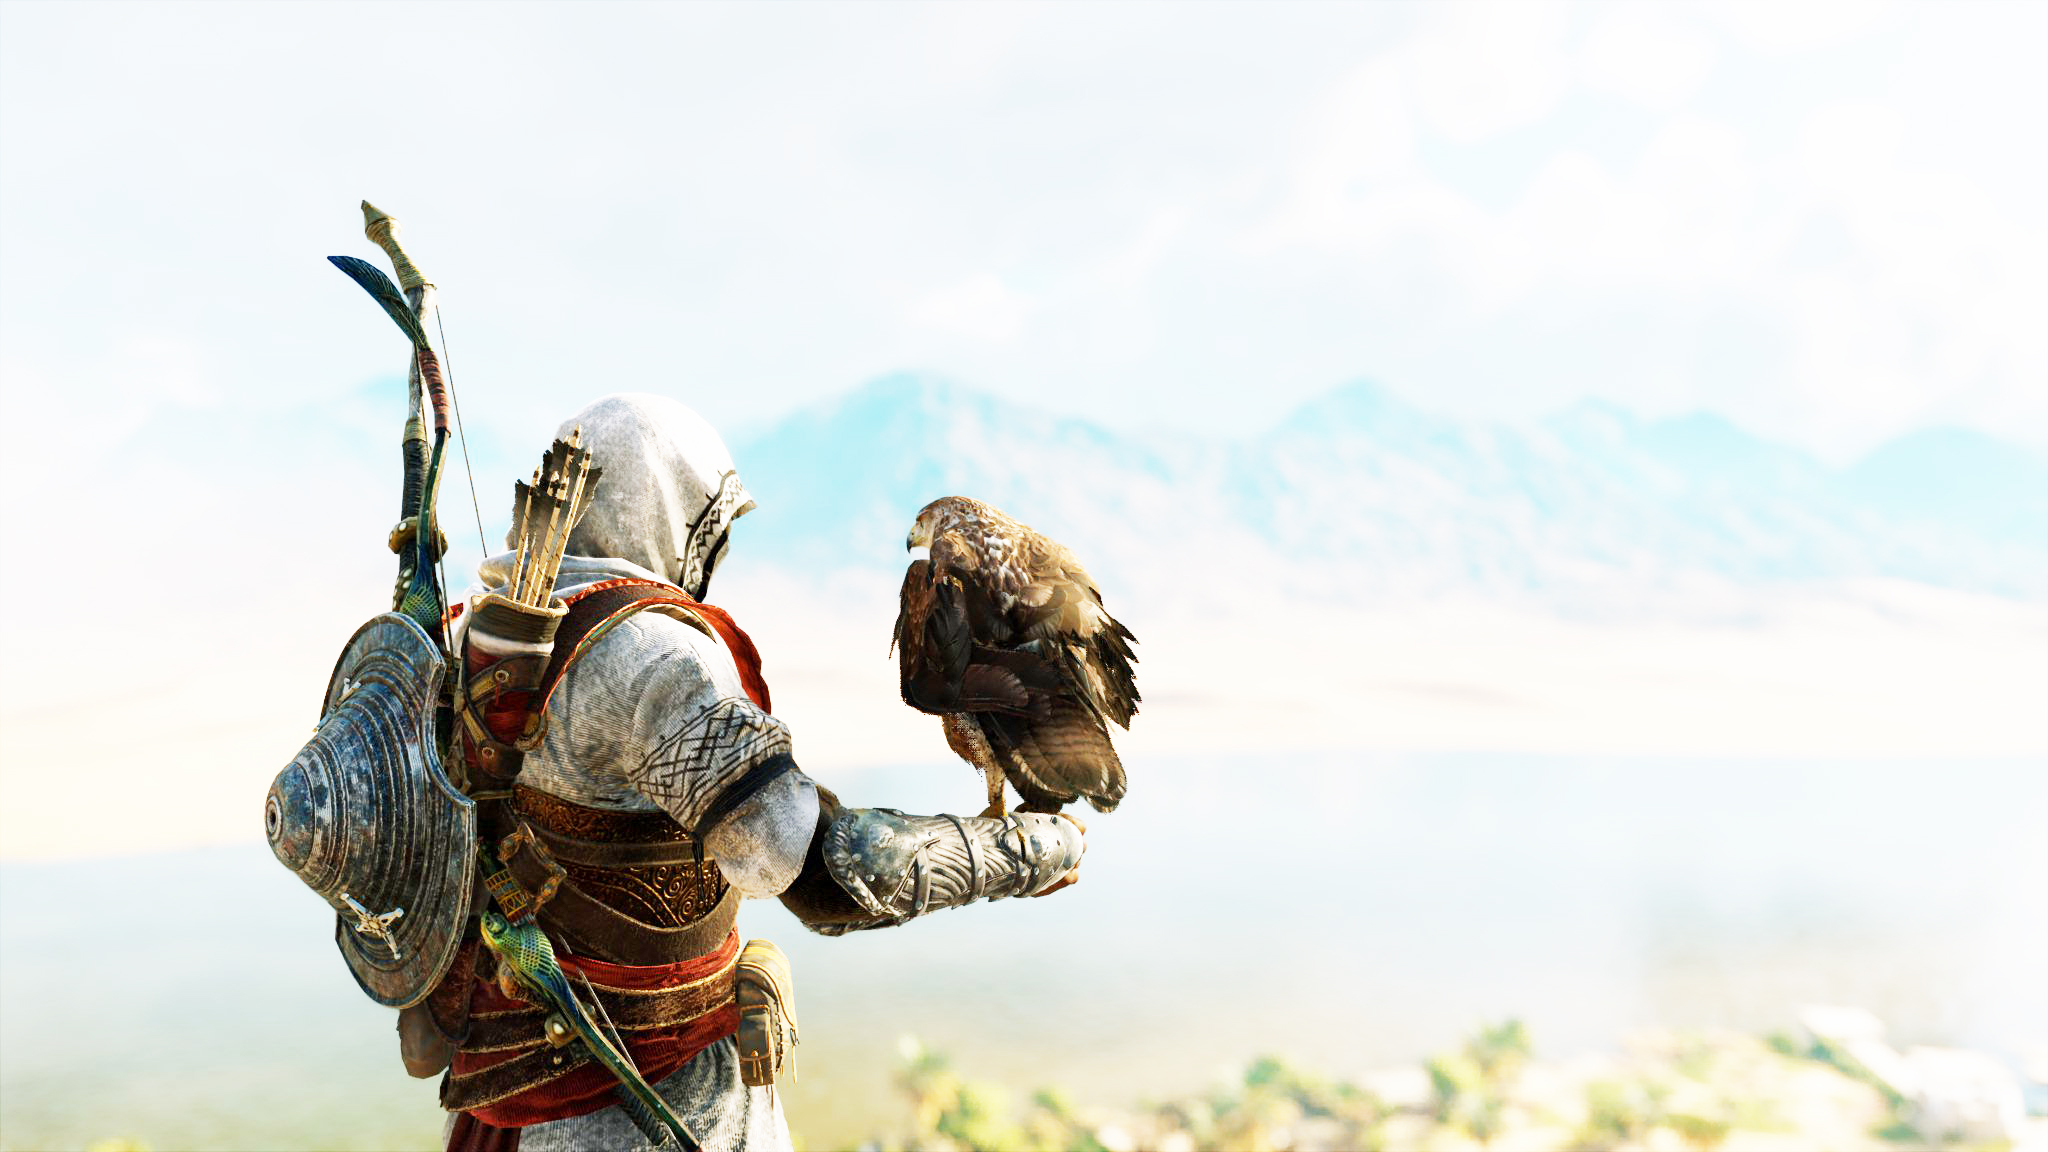 General 2048x1152 Assassin's Creed: Origins Assassin's Creed birds video games Bayek Senu video game art video game characters CGI hoods eagle animals mountains shield bow and arrow